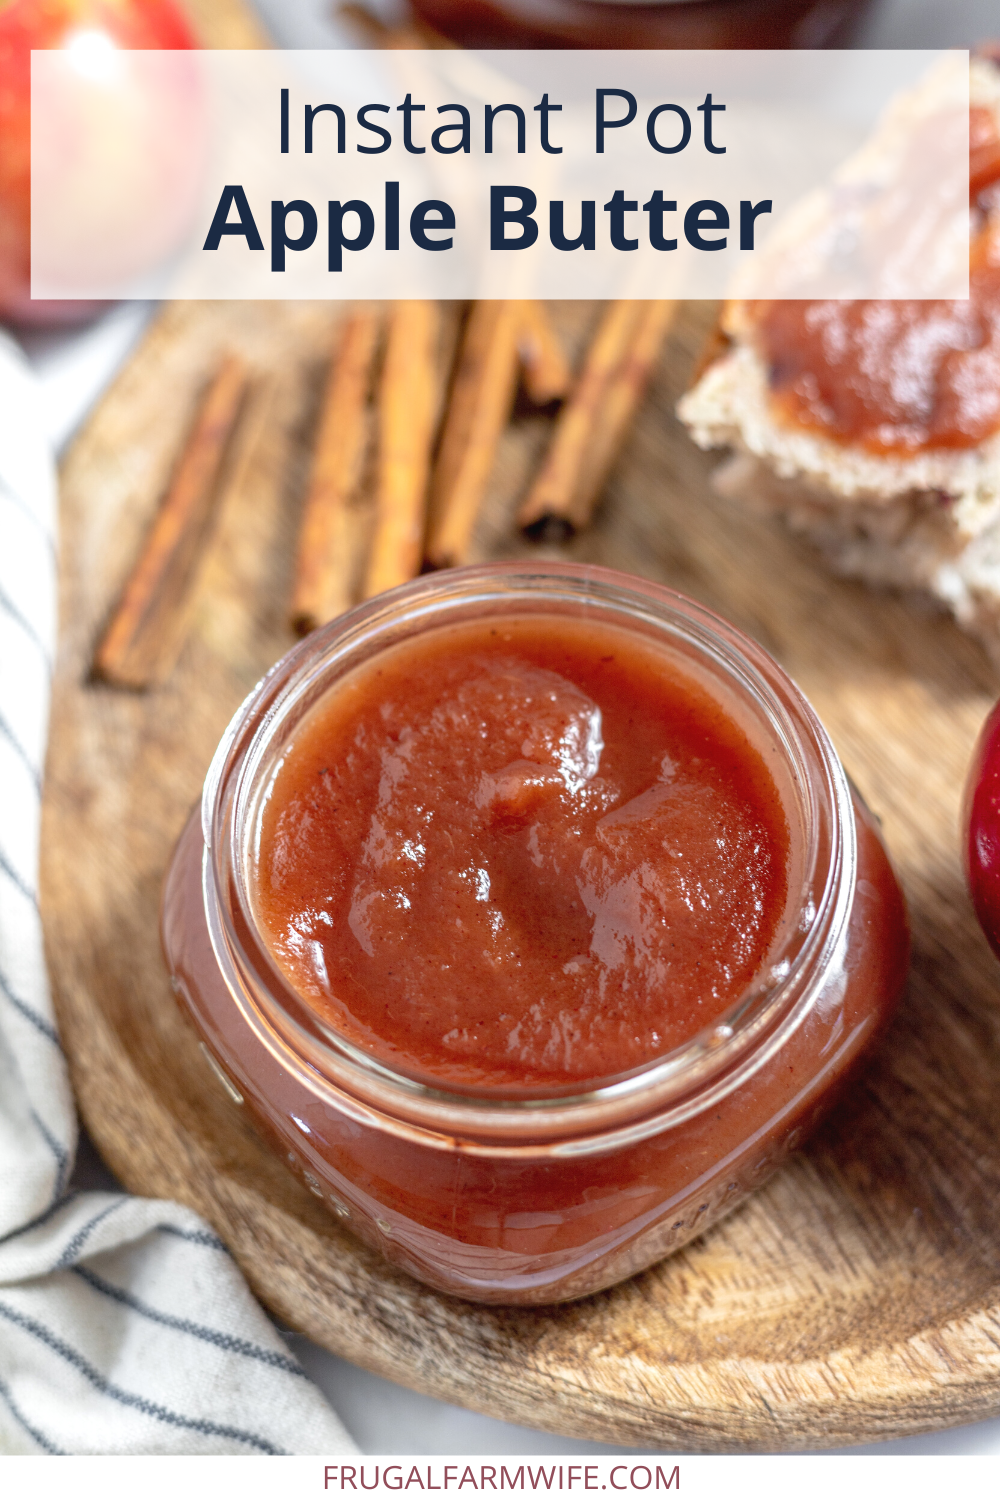 instant pot apple butter on a serving place with toast and apples.